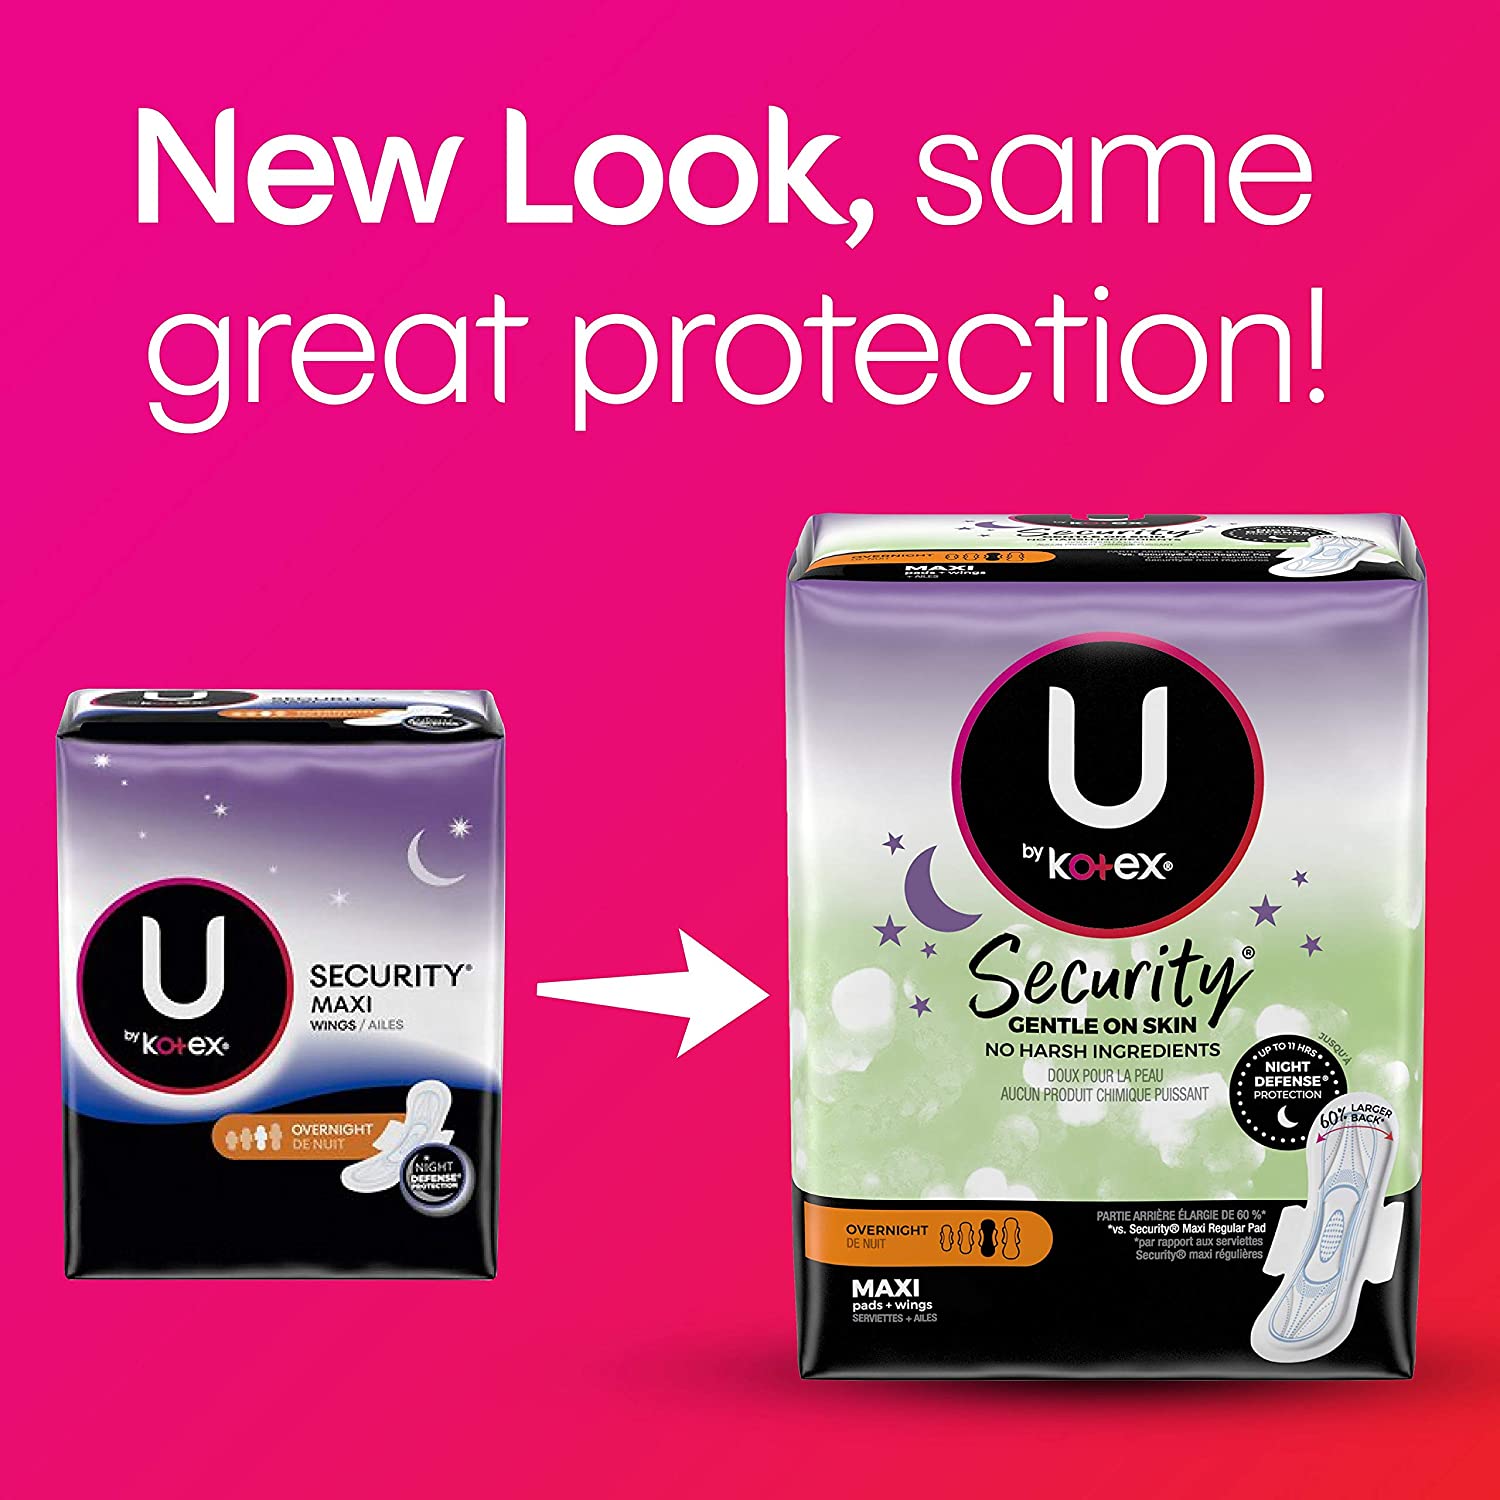 U by Kotex Security Maxi Pads with Wings, Overnight Absorbency, Unscented - 14 Count